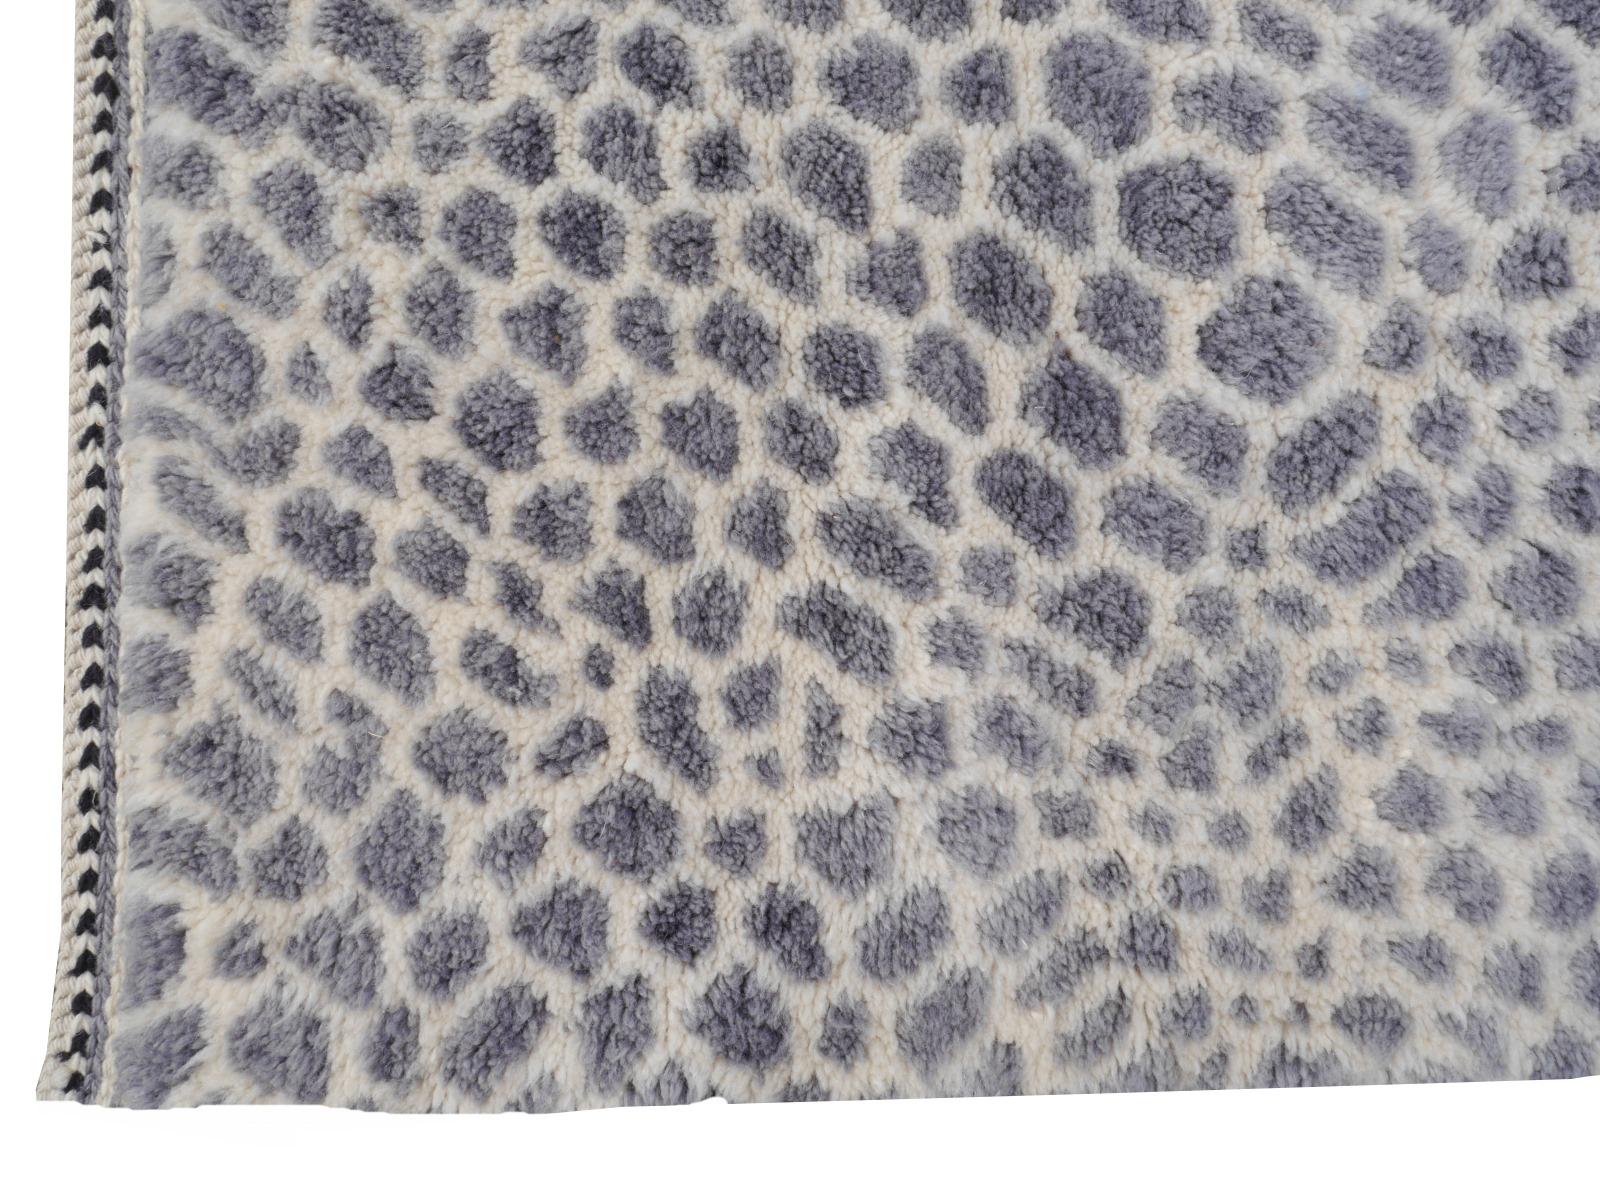 Contemporary North African Moroccan Berber Rug Leopard Cheetah Design Soft Quality Gray Beige For Sale